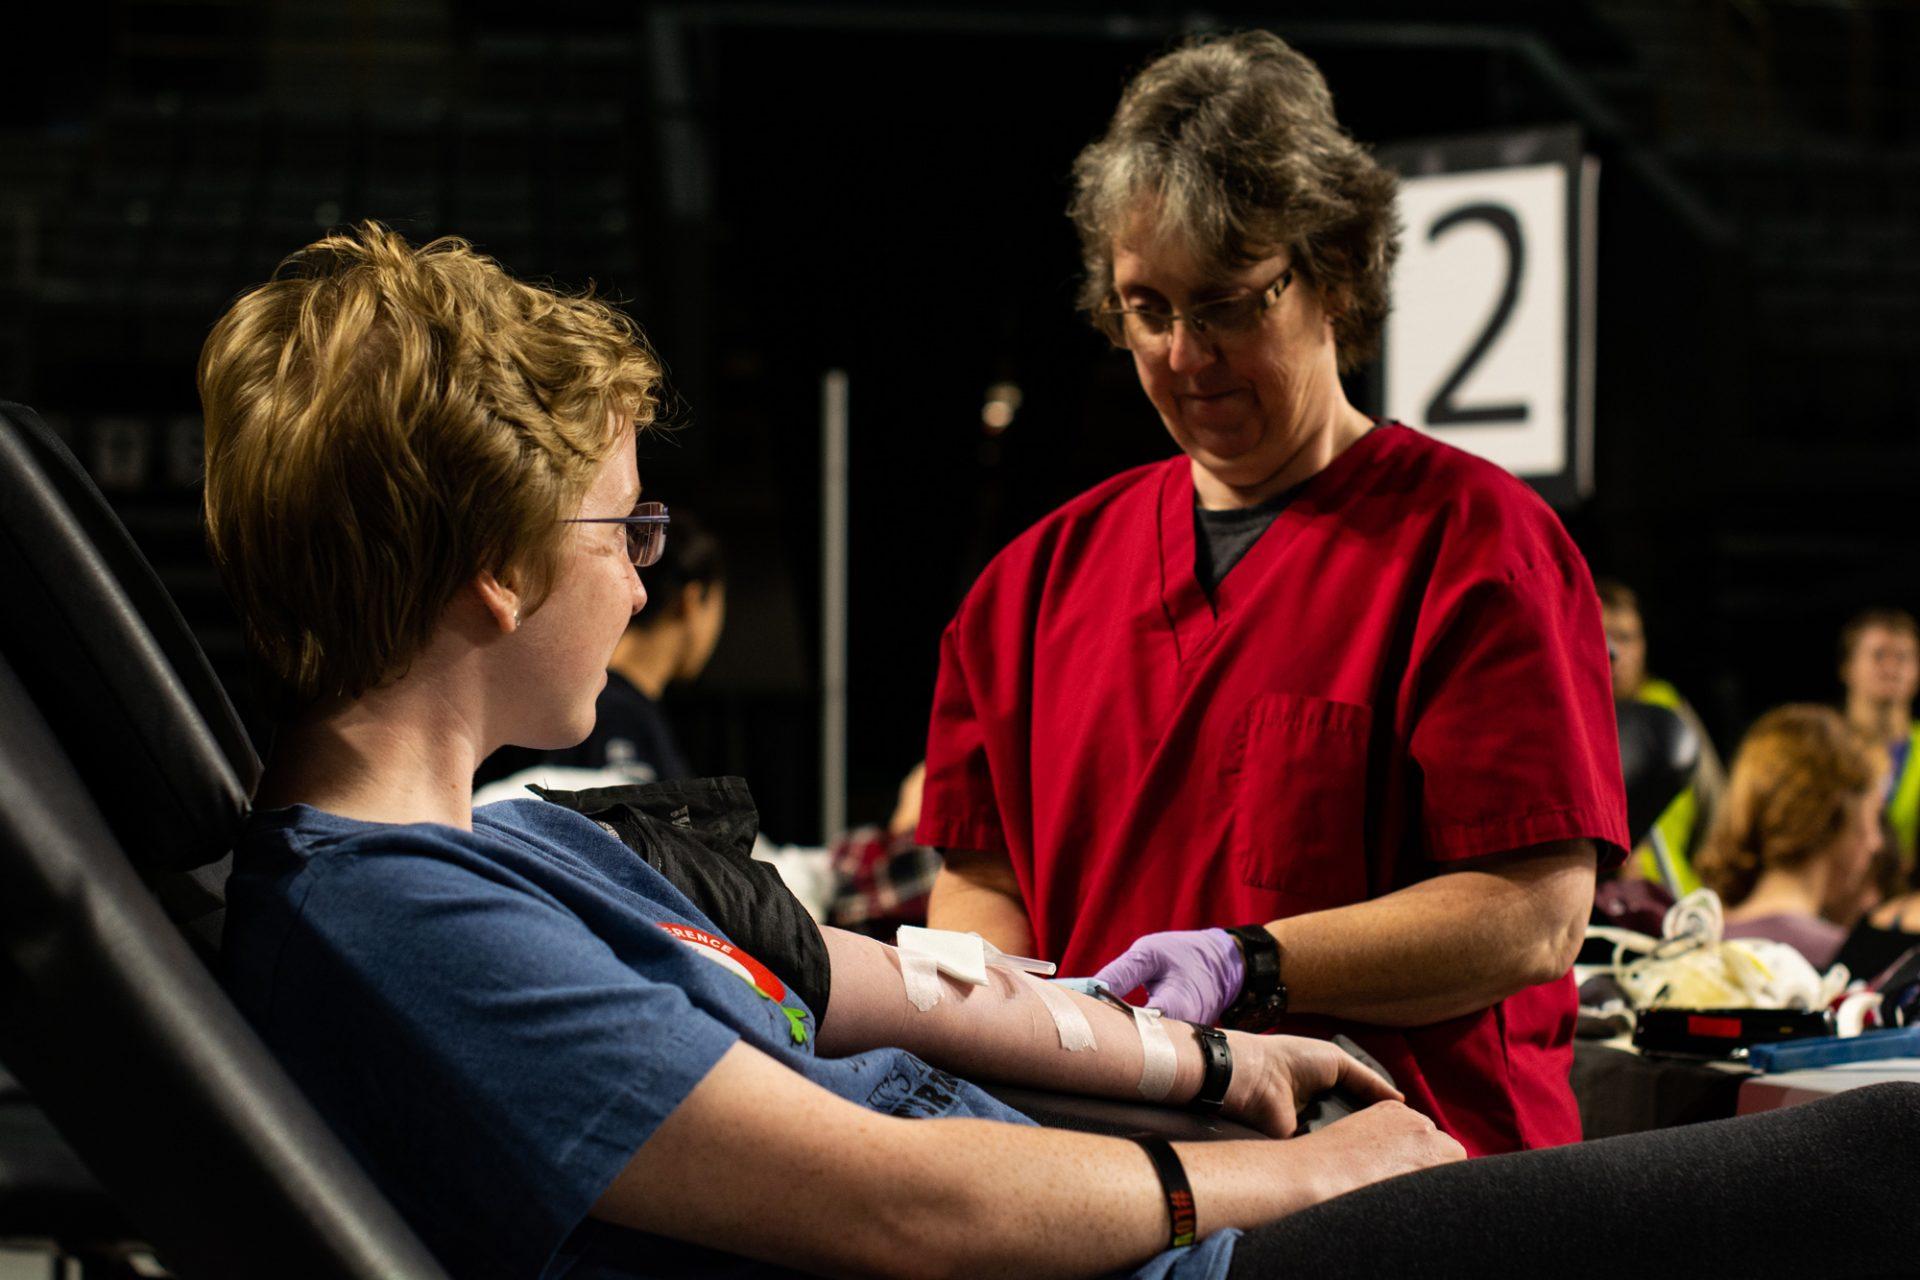 Environmental Science major Lara Chapman is assisted by a nurse while donating blood.